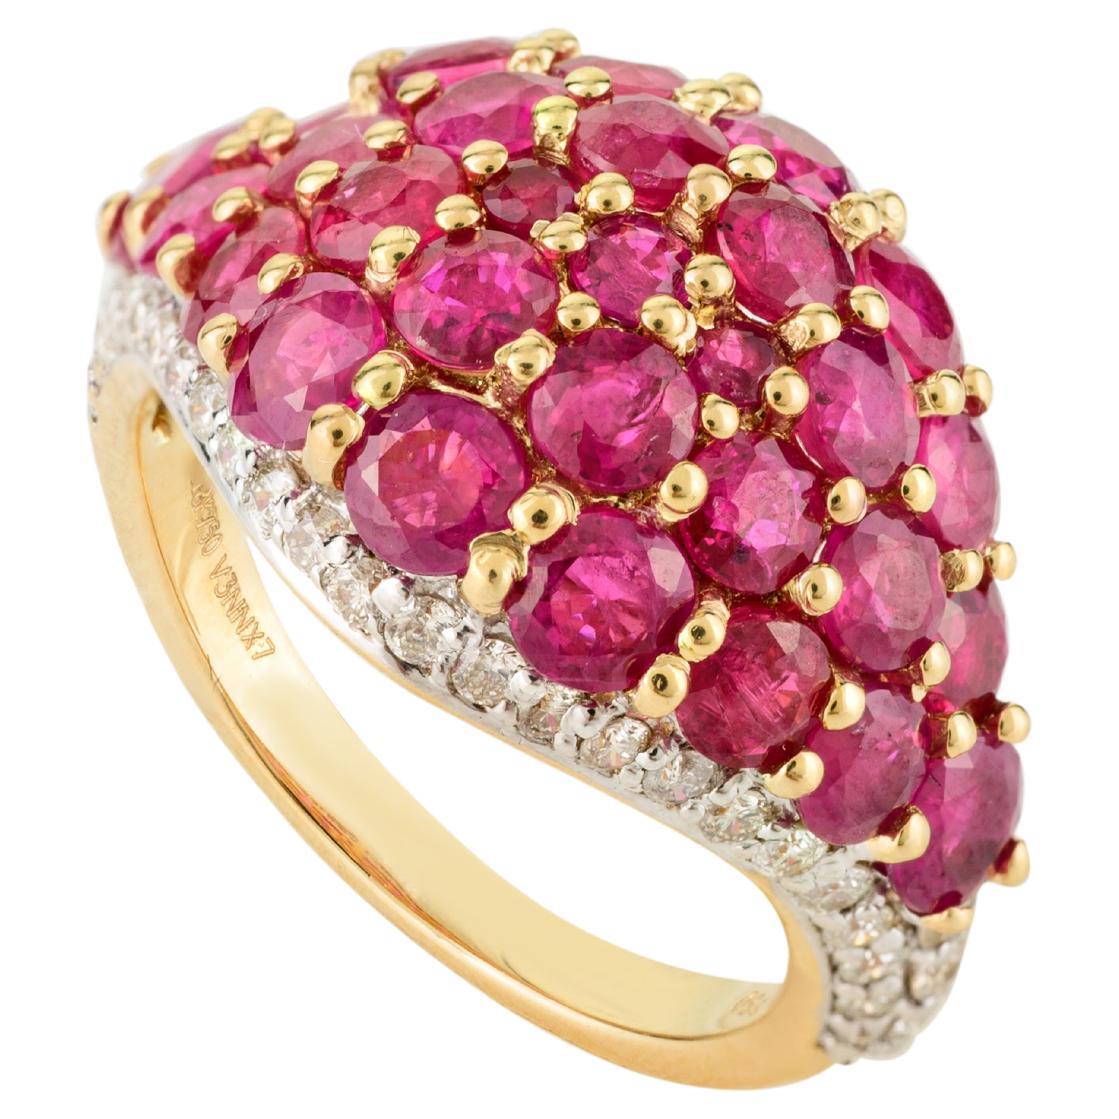 Natural Cluster Ruby and Diamond Wedding Ring in 18k Yellow Gold